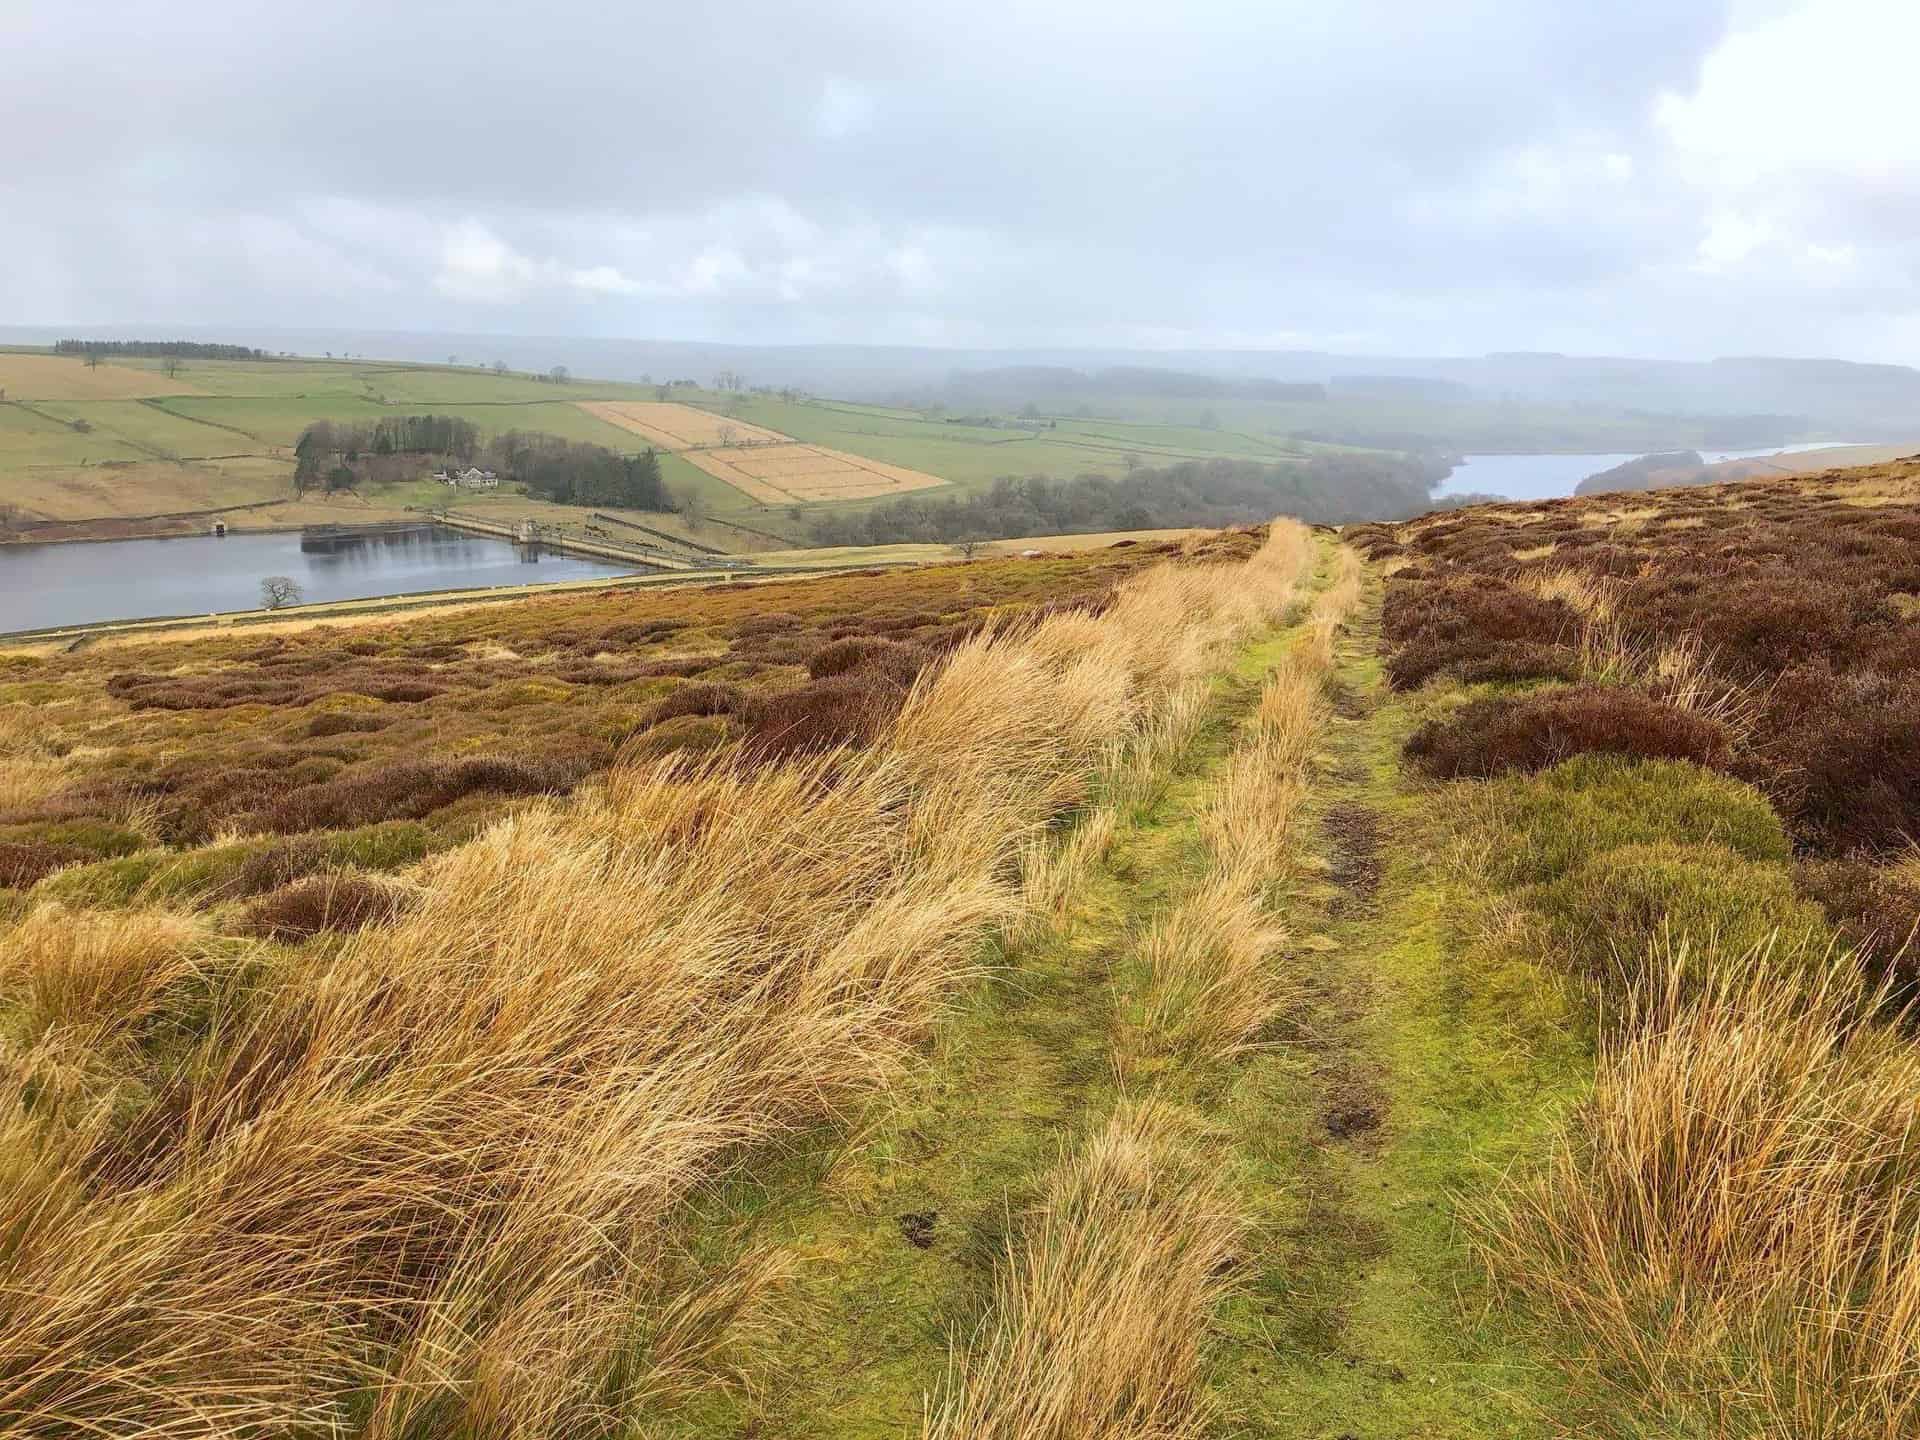 The view of Roundhill Reservoir on the left and Leighton Reservoir on the right.